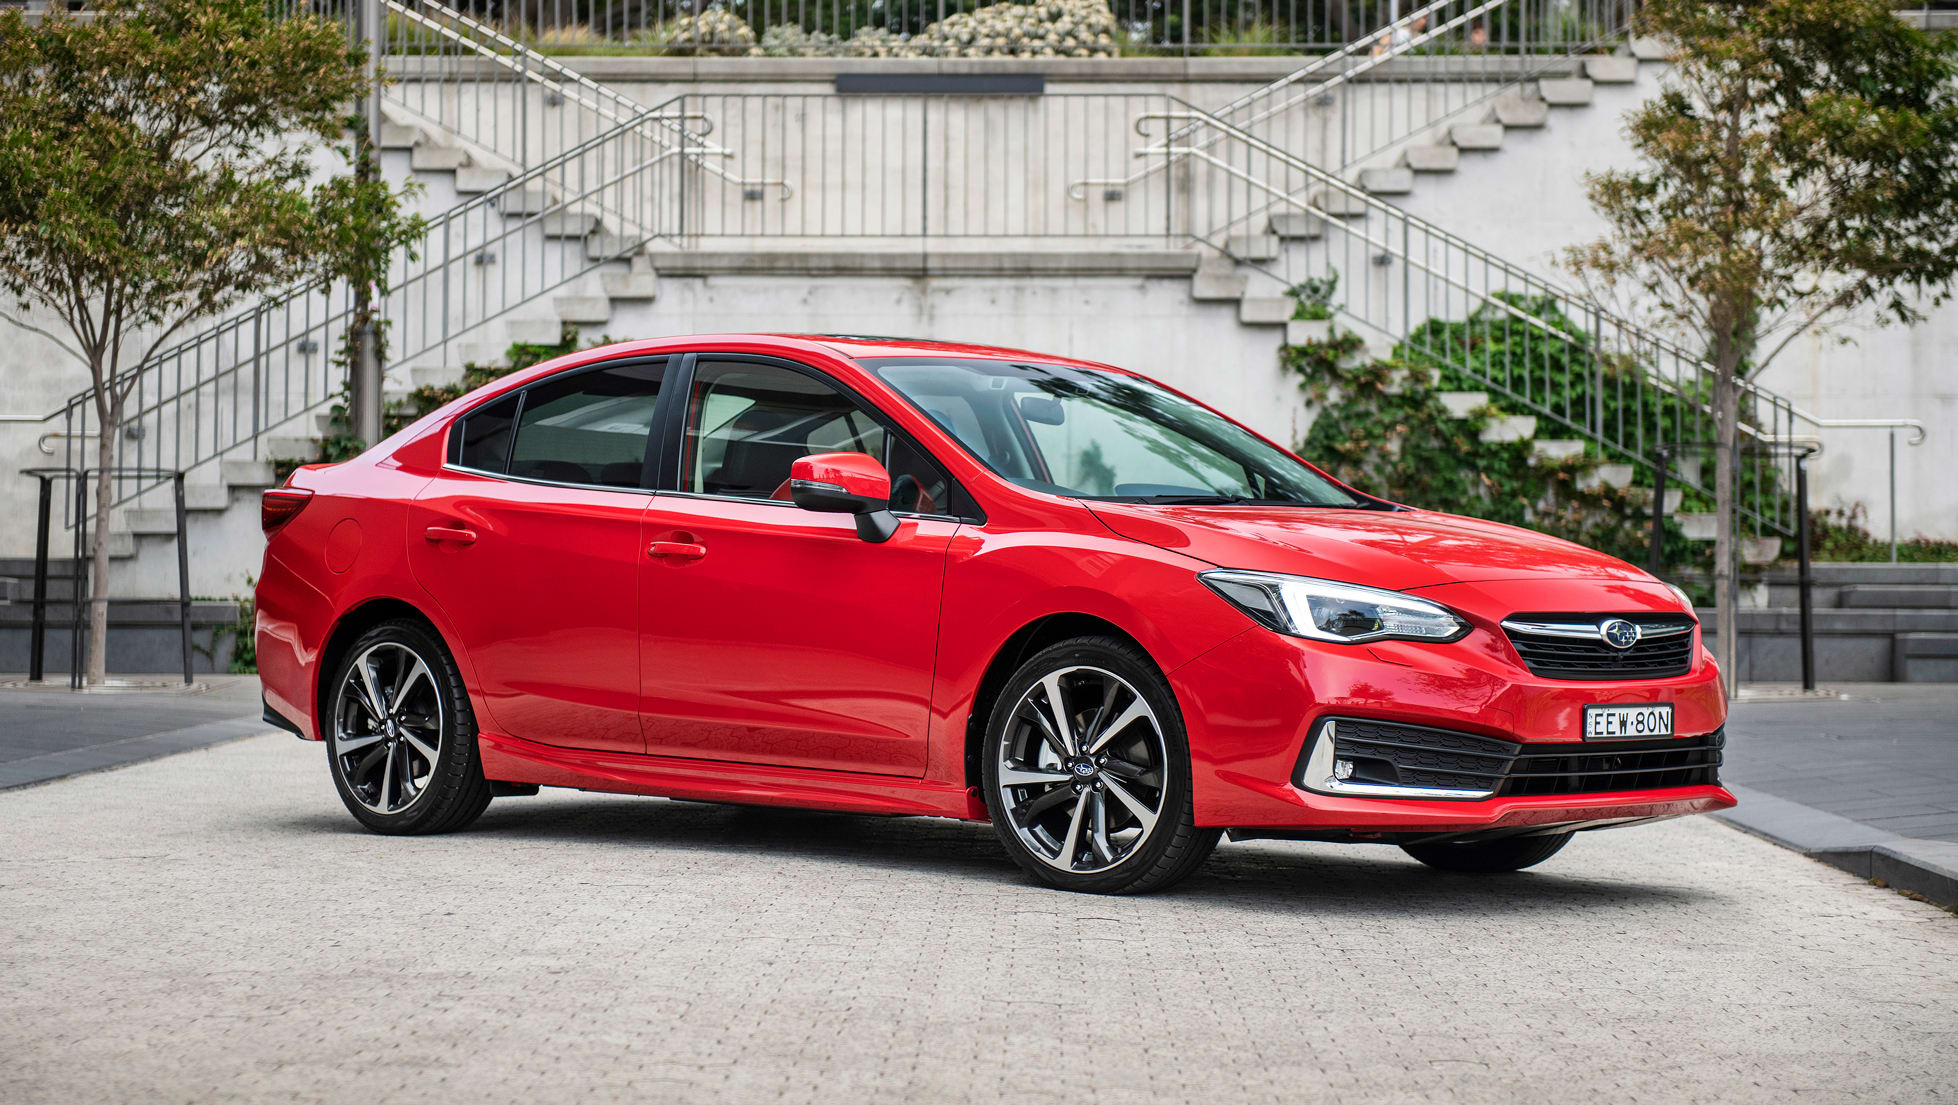 New Subaru Impreza 2020 pricing and specs detailed: All ...